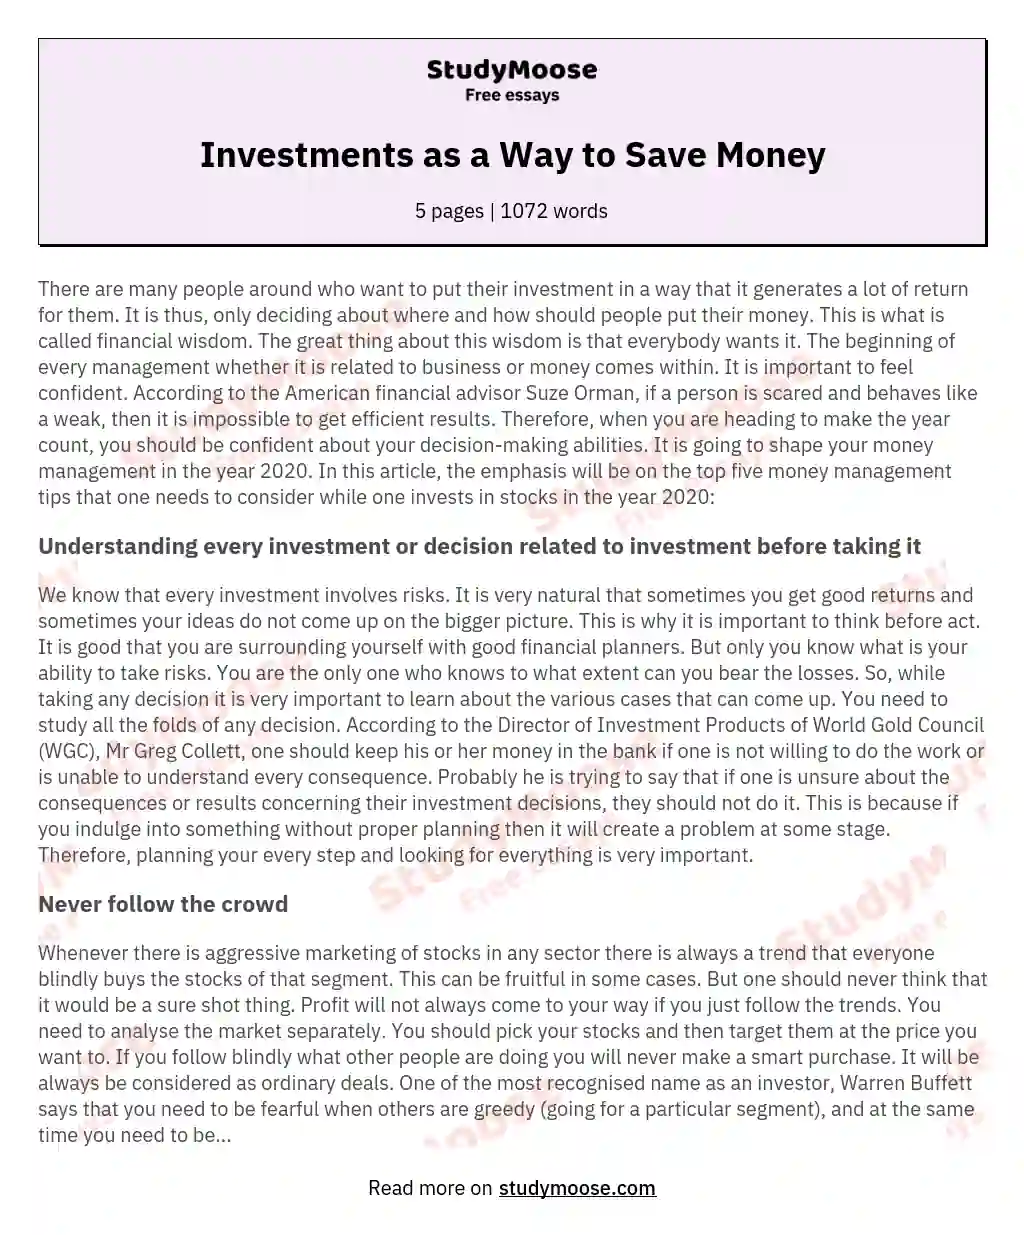 Investments as a Way to Save Money